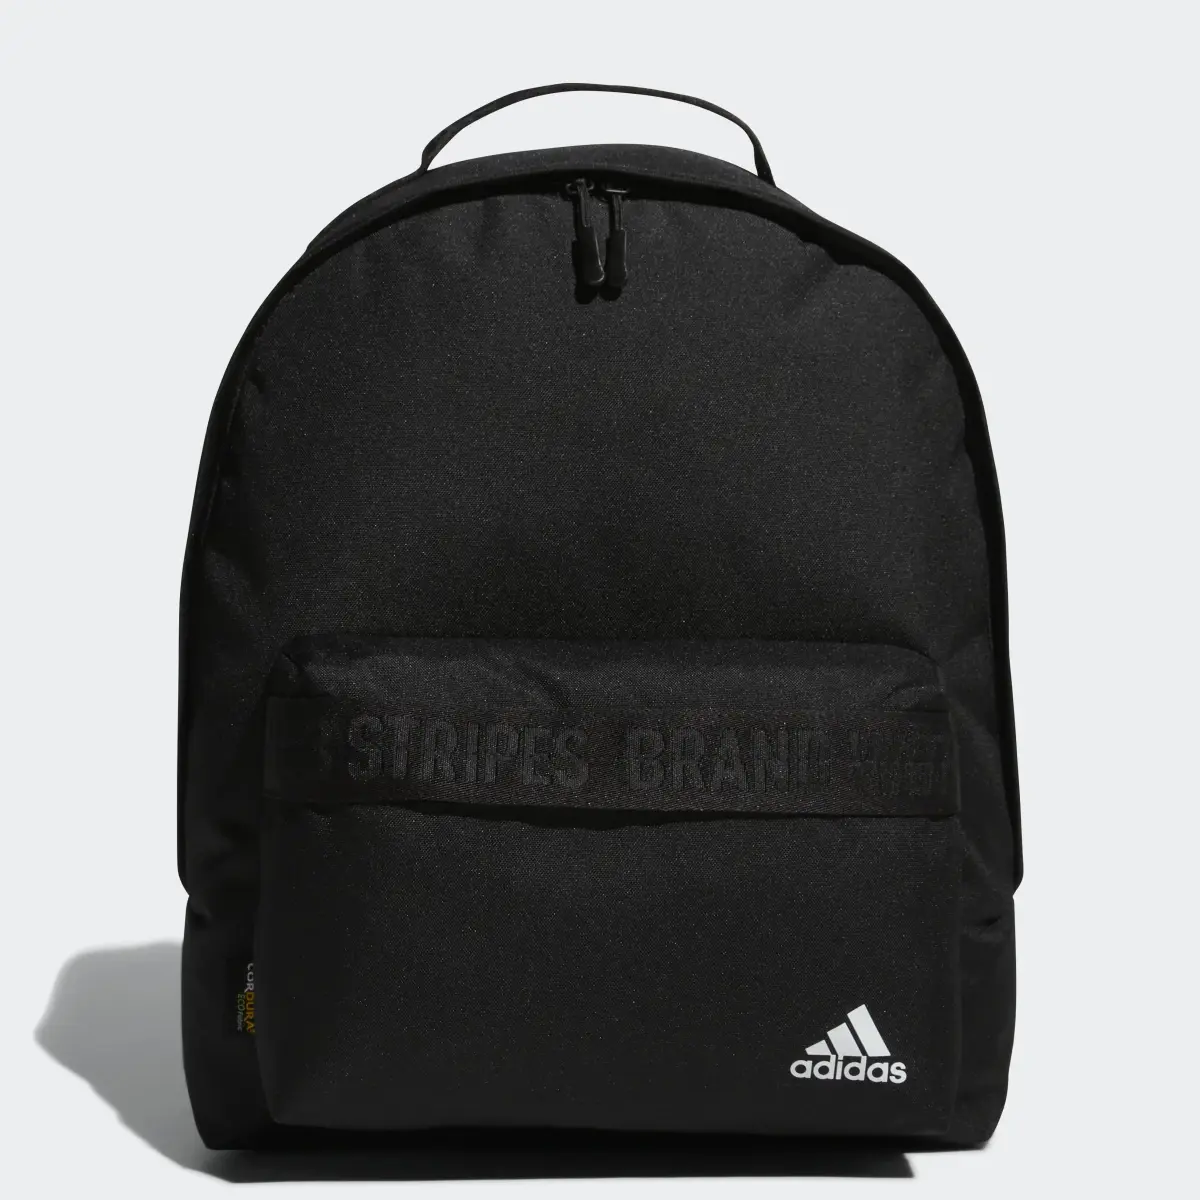 Adidas Must Haves Backpack. 1